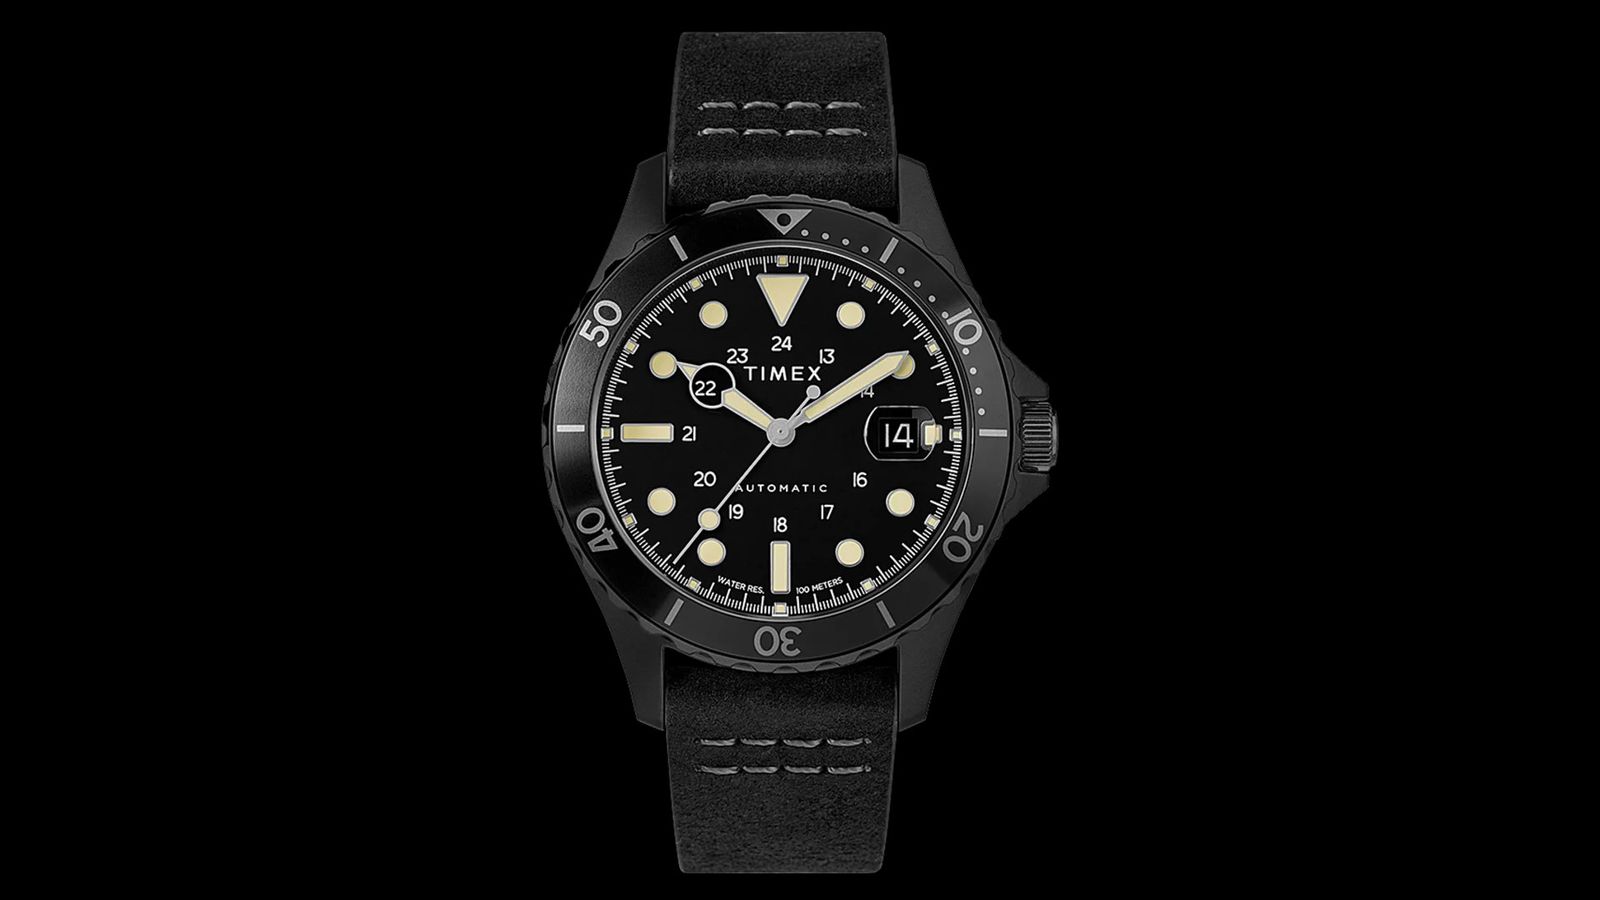 Timex Navi XL Automatic product image of an all-black watch with a leather band. 